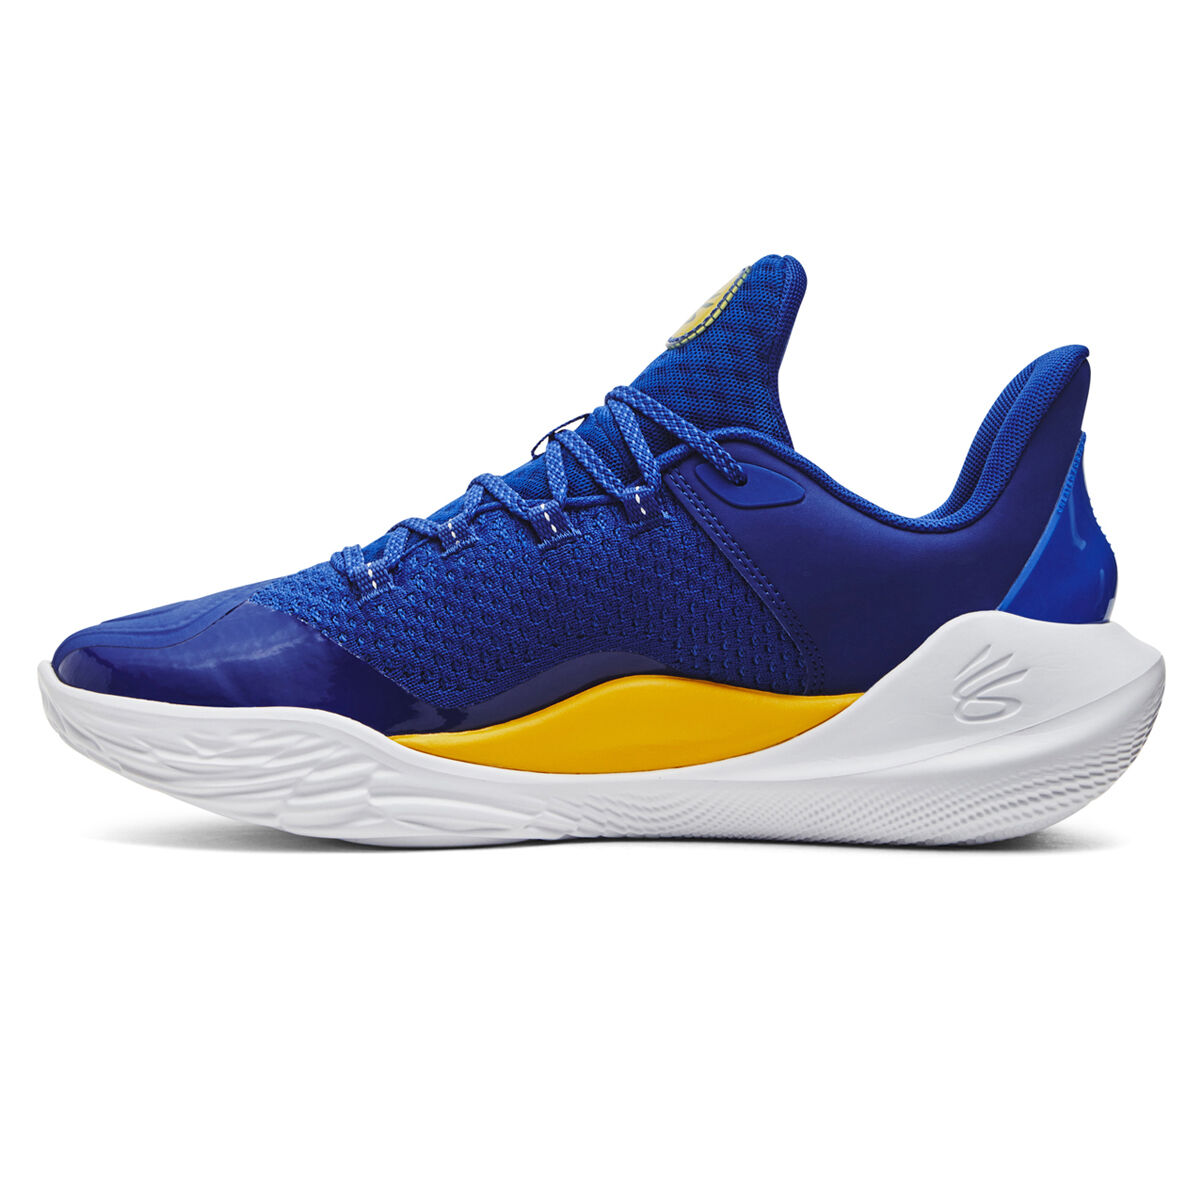 Under Armour Curry 11 'Champion Mindset' Basketball Shoes